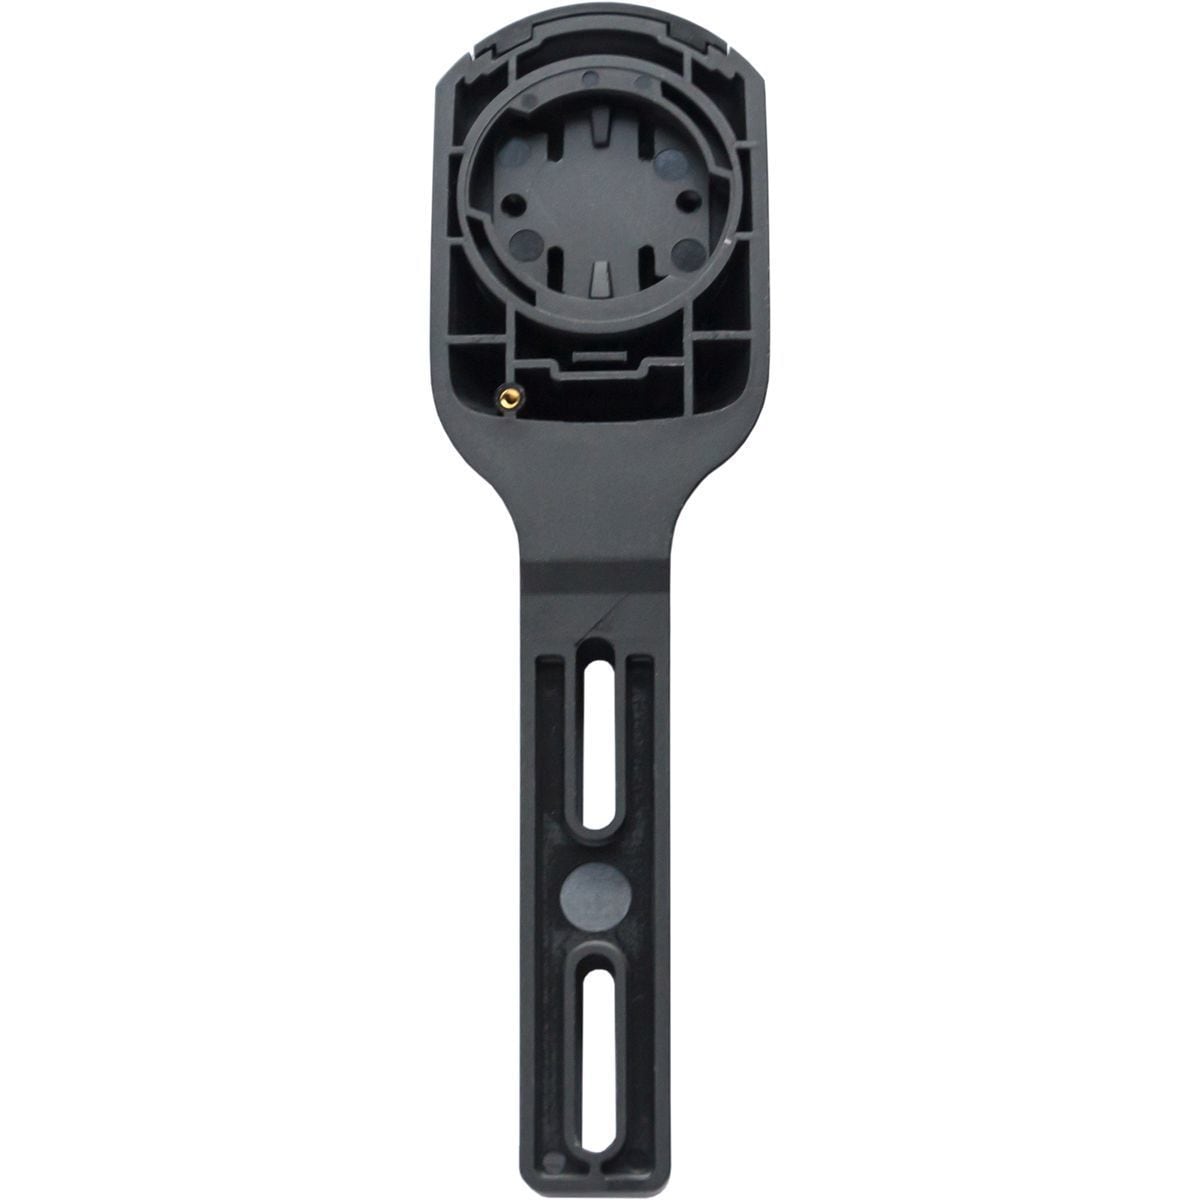 Wahoo Fitness ELEMNT BOLT Two Bolt Out Front Mount